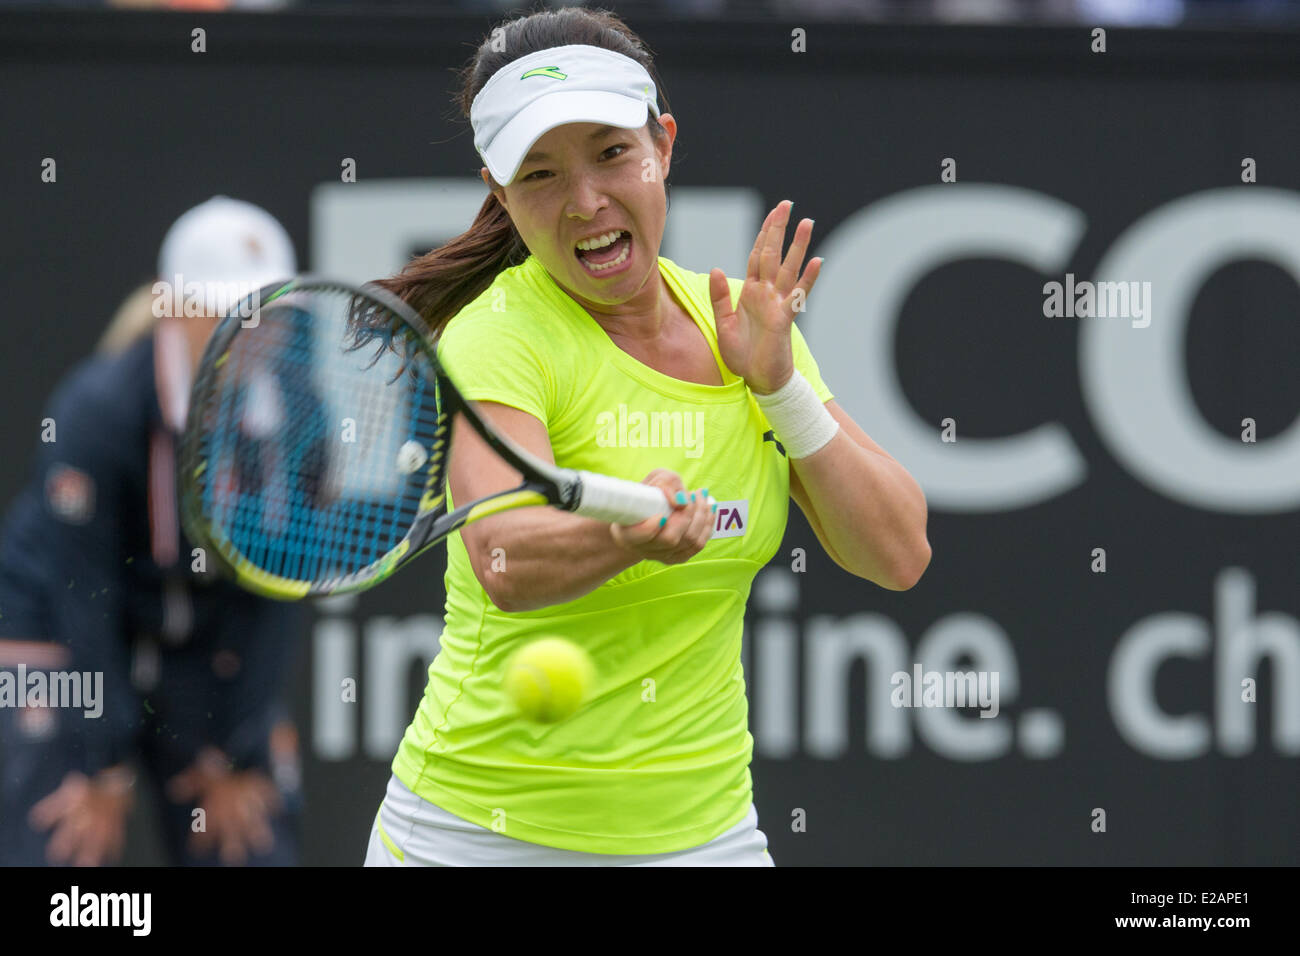 Rosmalen, The Netherlands. 18th June, 2014. Chinese tennis player Jie Zheng hits a forehand during the 2nd round singles match of the Topshelf Open 2014 at Autotron, Rosmalen, Netherlands on 18.06.2014. She won against Carla Suarez Navarro (ESP) who had to retire at 7:5 0:1 due to back problems.  Credit:  Janine Lang/Alamy Live News Stock Photo